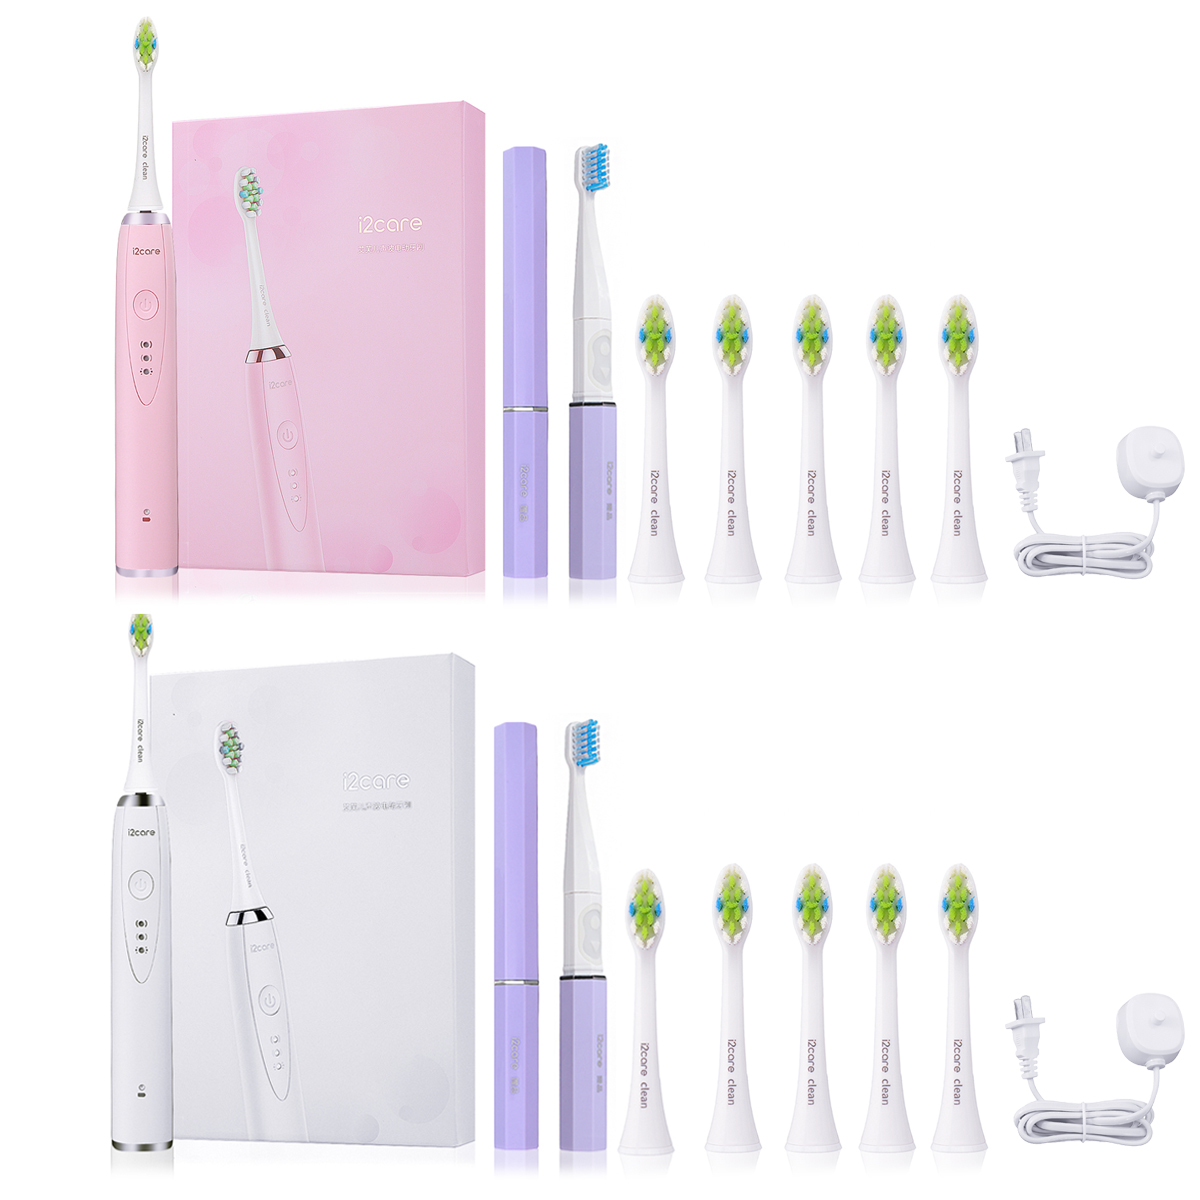 

i2care Electric Sonic Toothbrush Set Li-Ion Battery Recharge